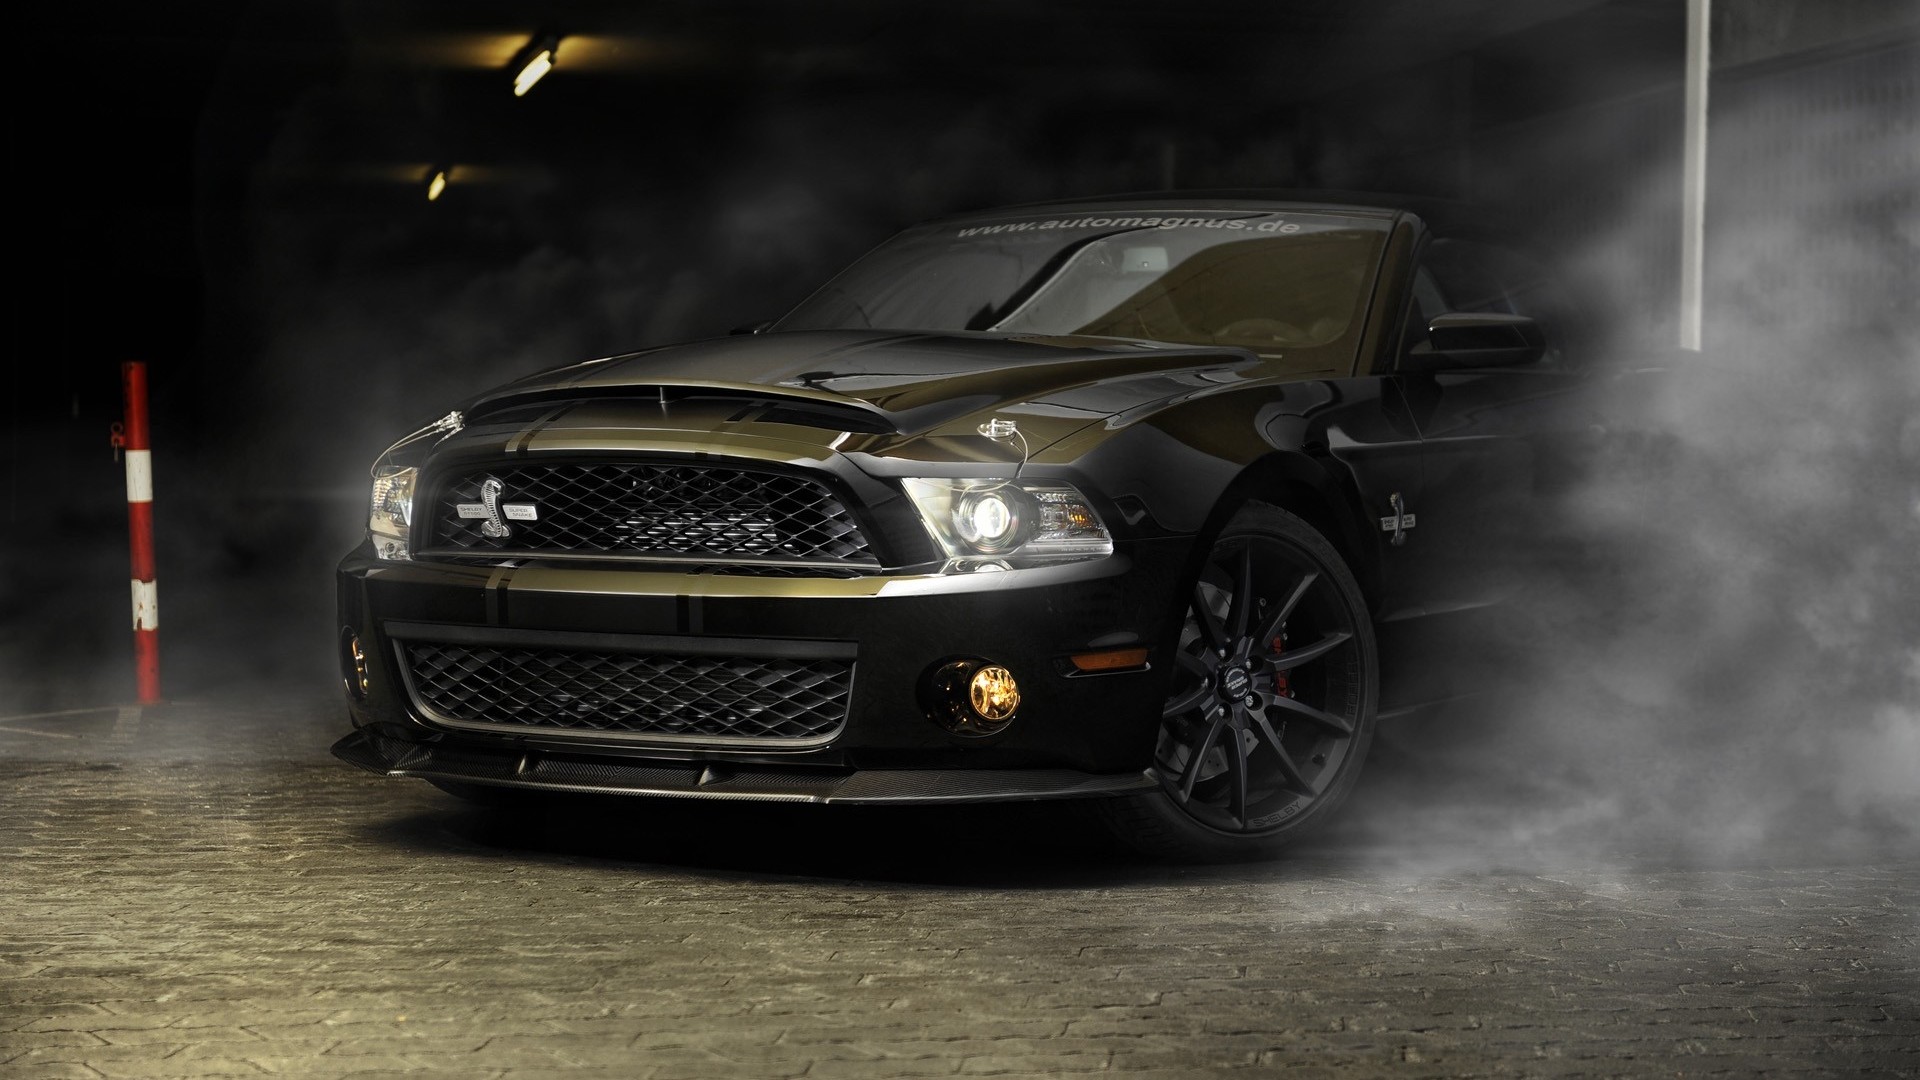 1920x1080 Shelby cobra mustang wallpapers.